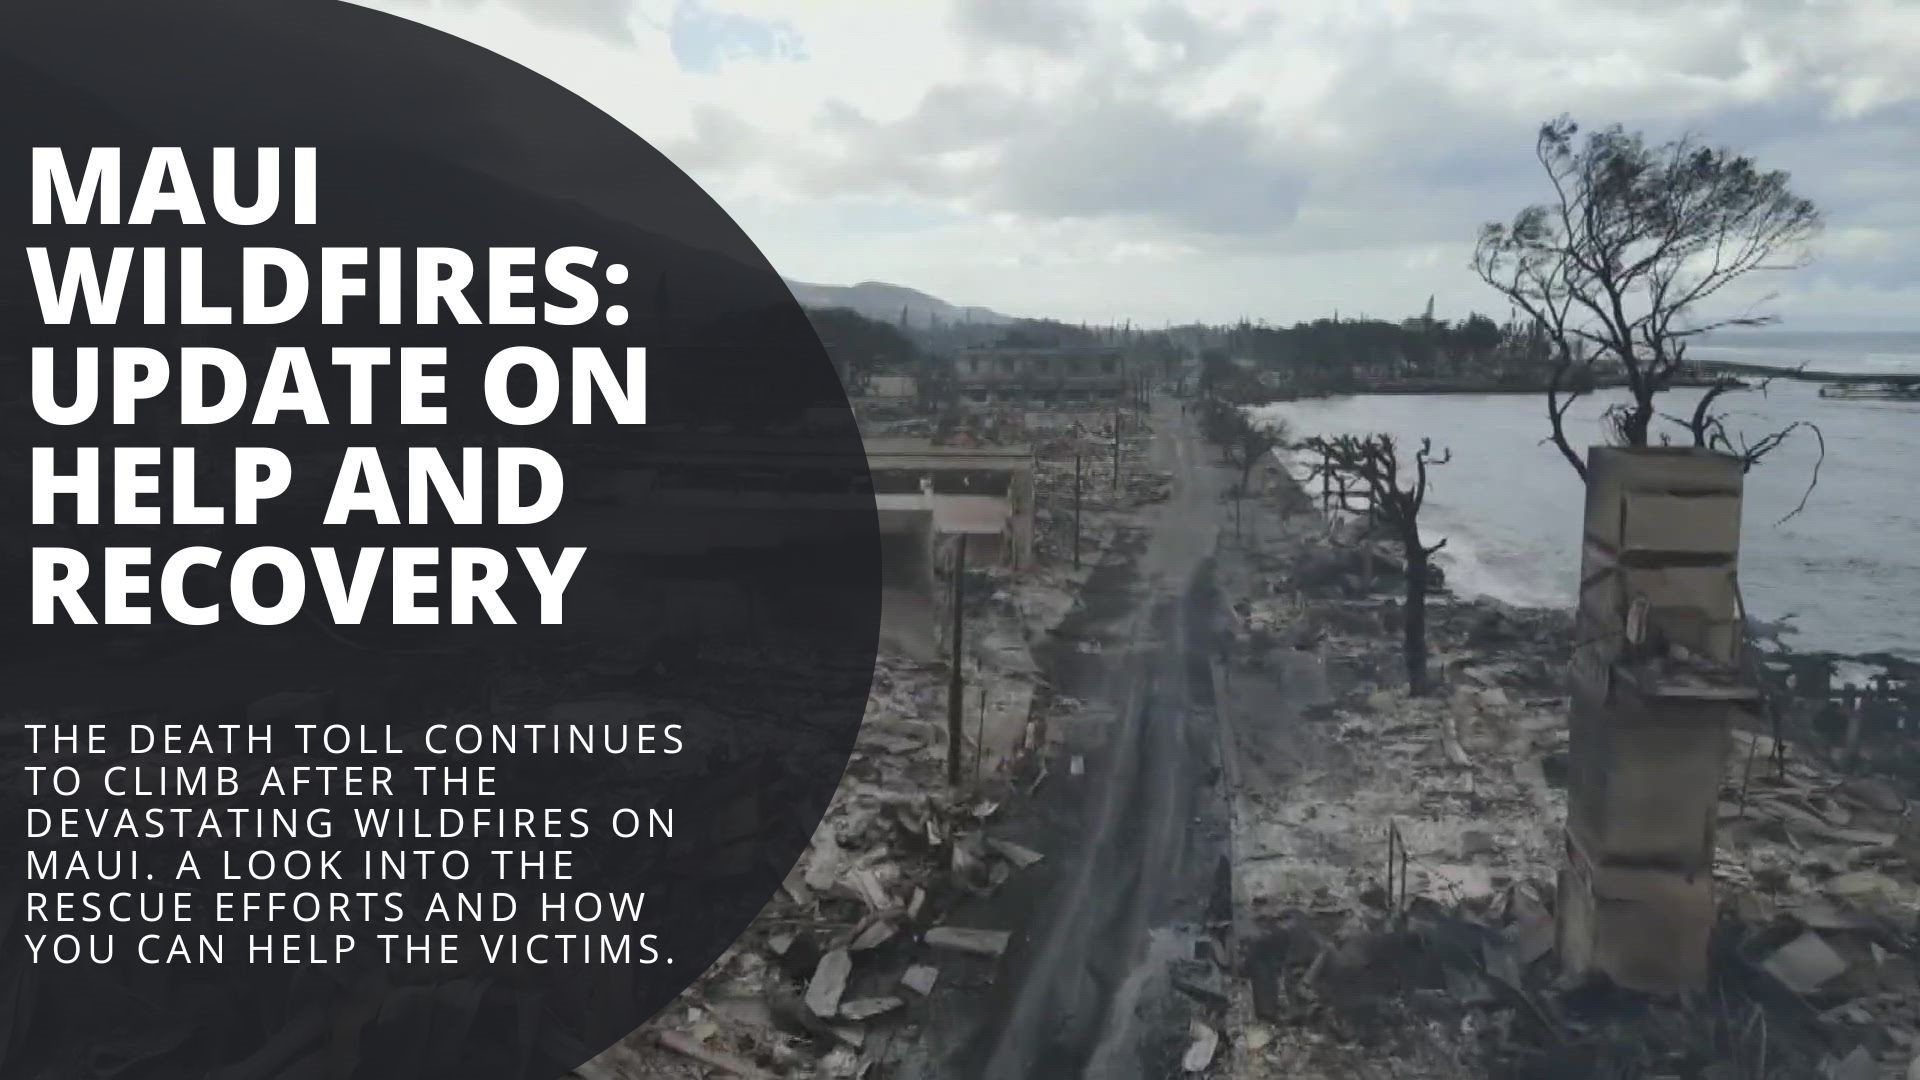 An update on the recovery and relief efforts in Hawaii due to deadly wildfires.